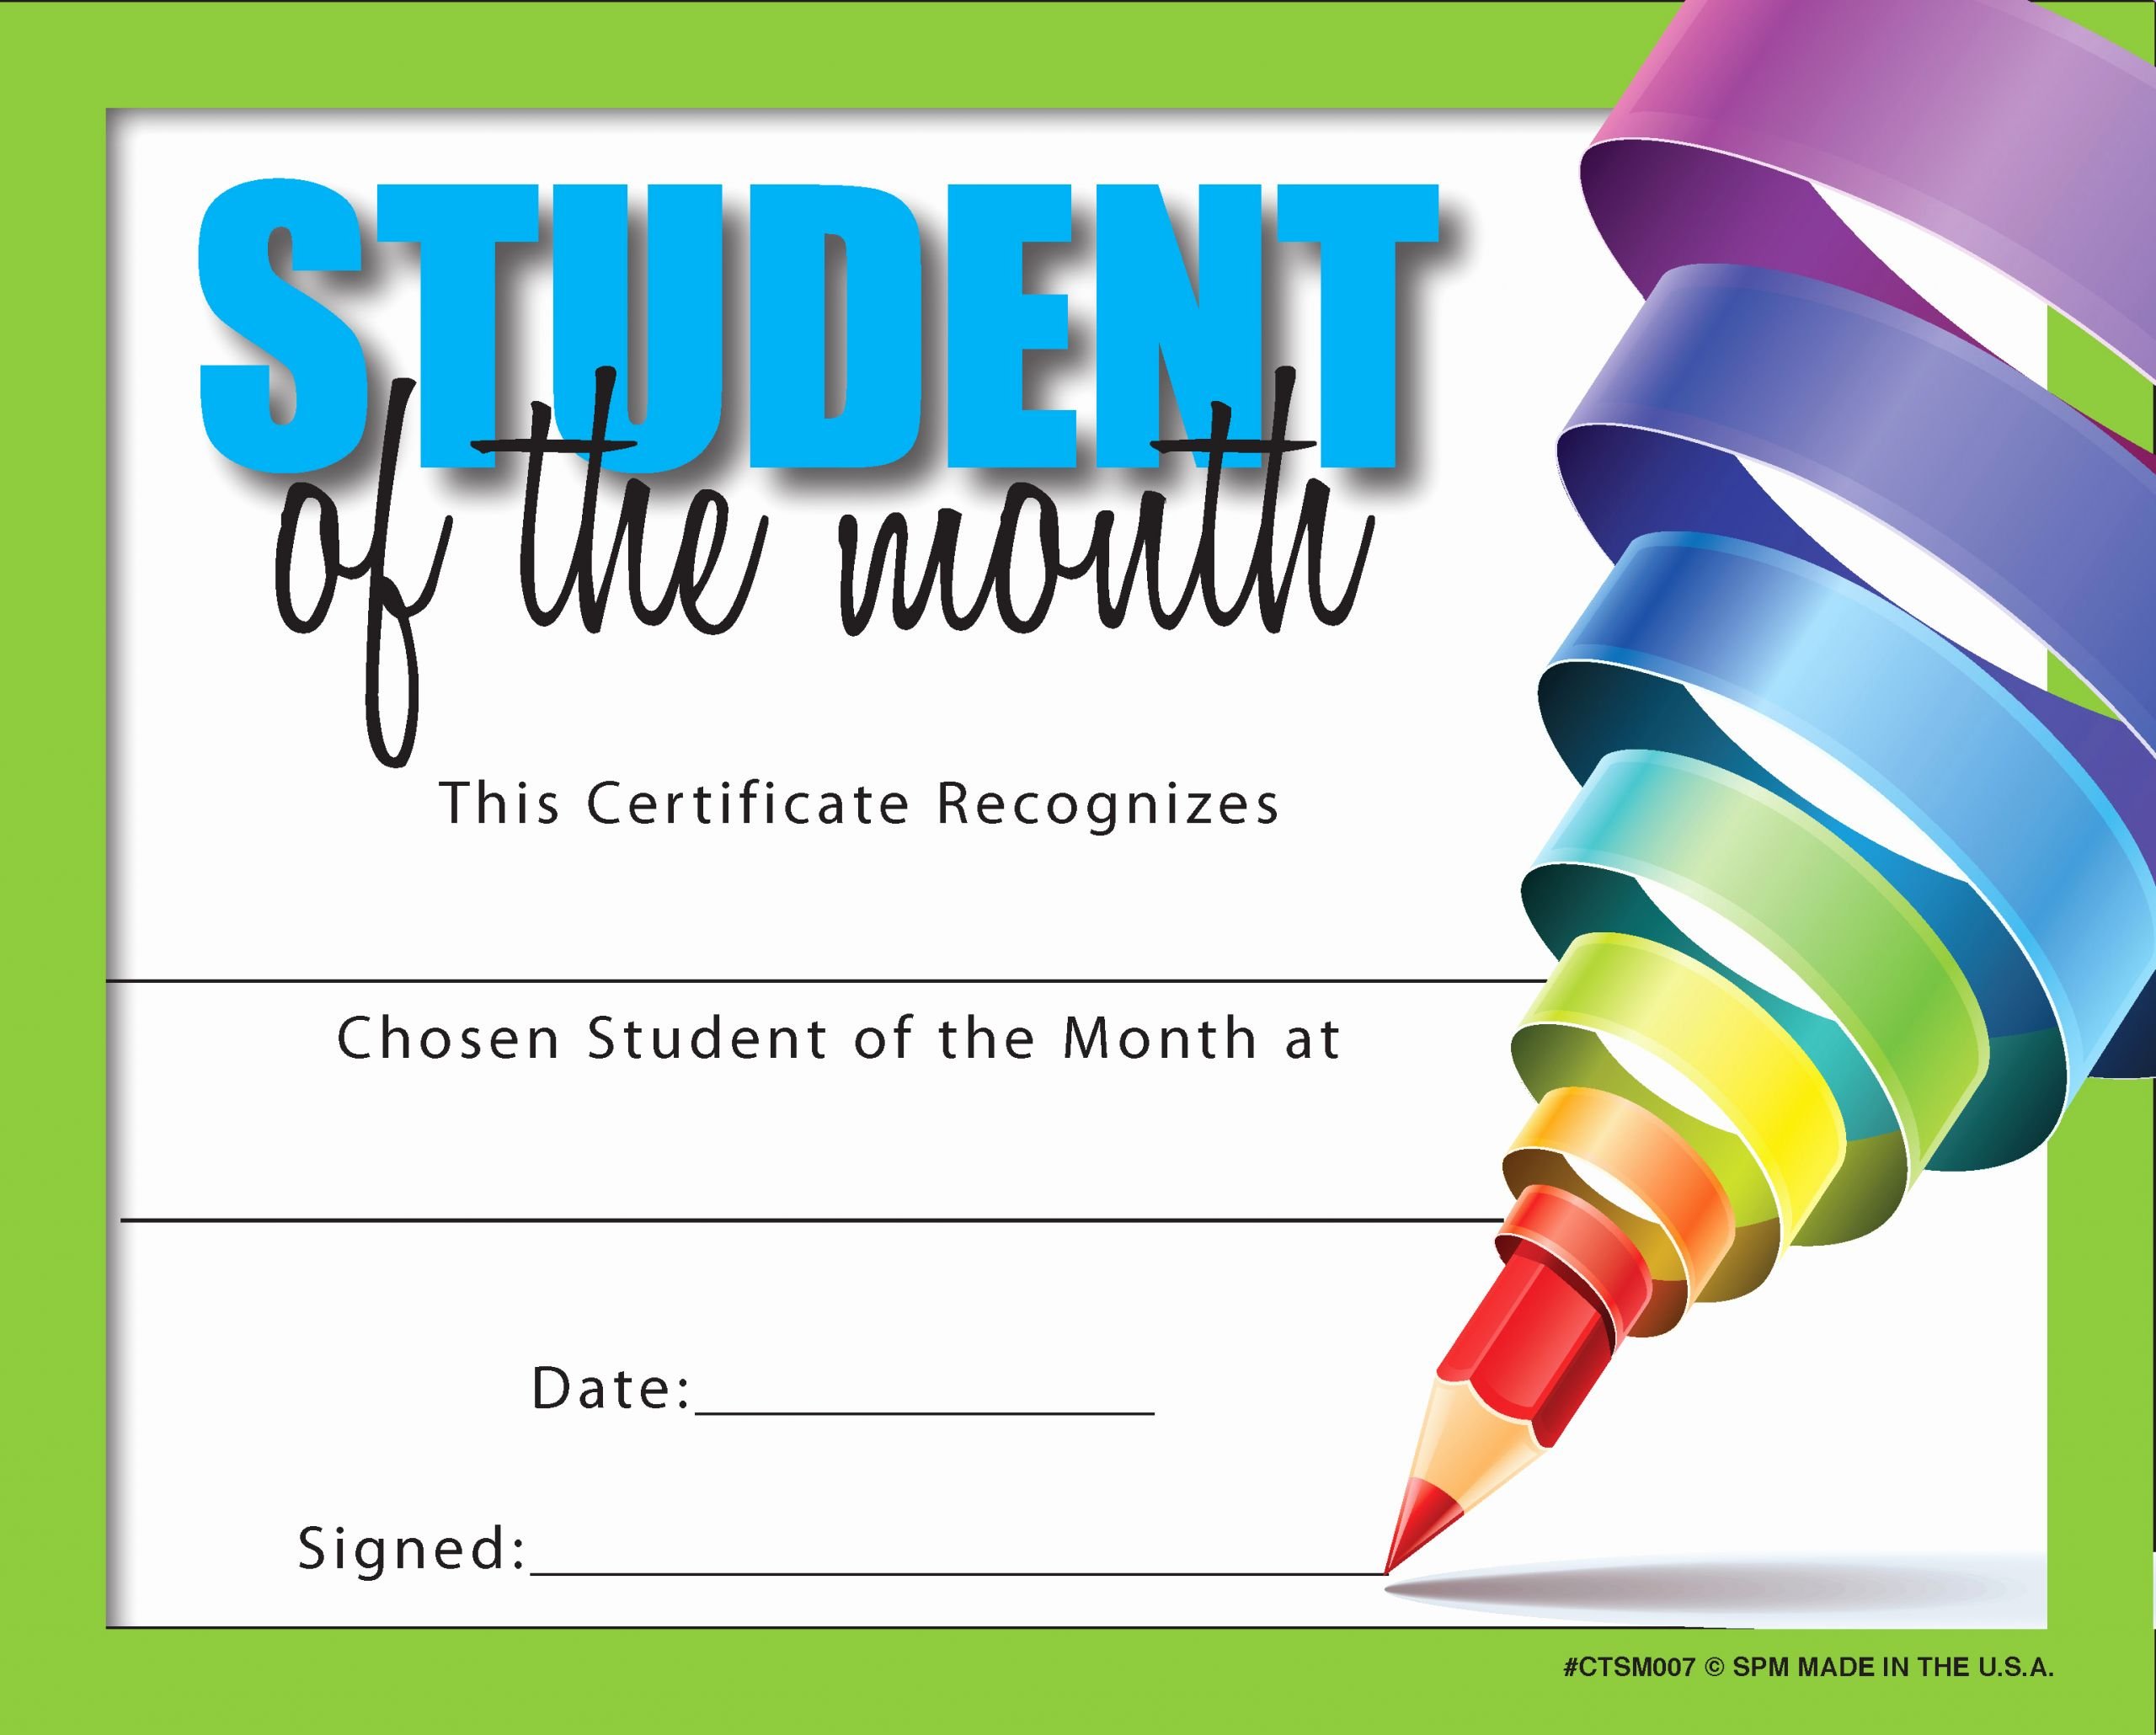 Student Of the Month Certificates Lovely Certificate for Student Of the Month Ctsm007 School